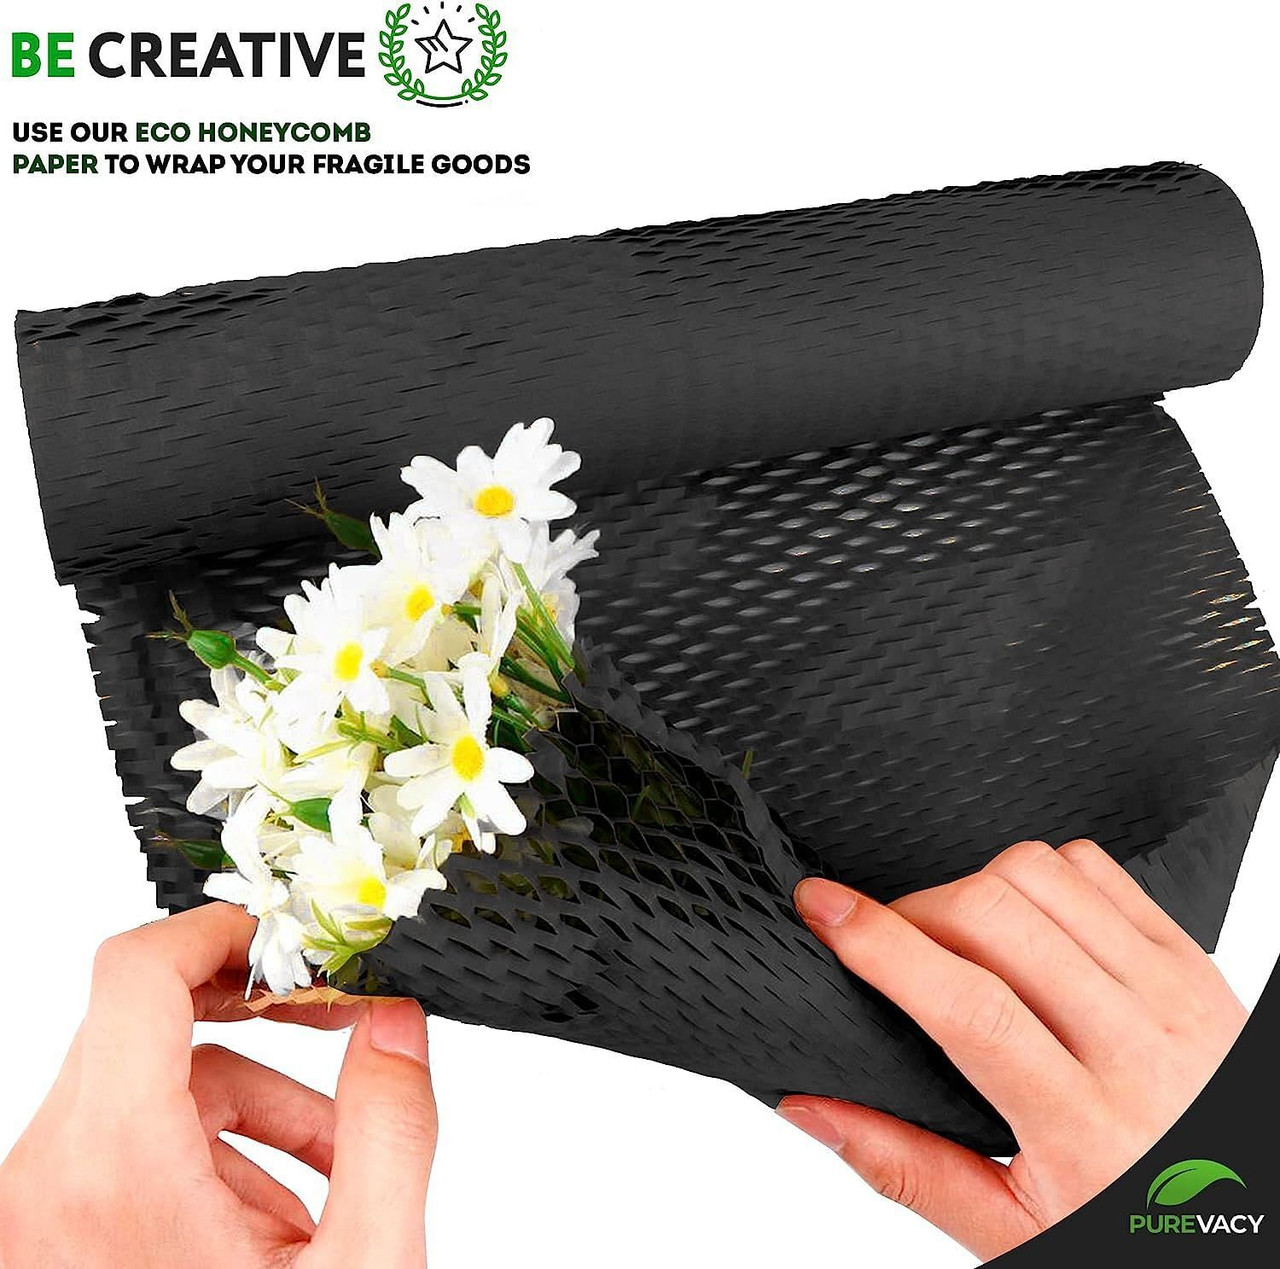 PUREVACY Honeycomb Packing Paper for Moving Breakables 15" x 164'; Black Honeycomb Paper Wrap for P